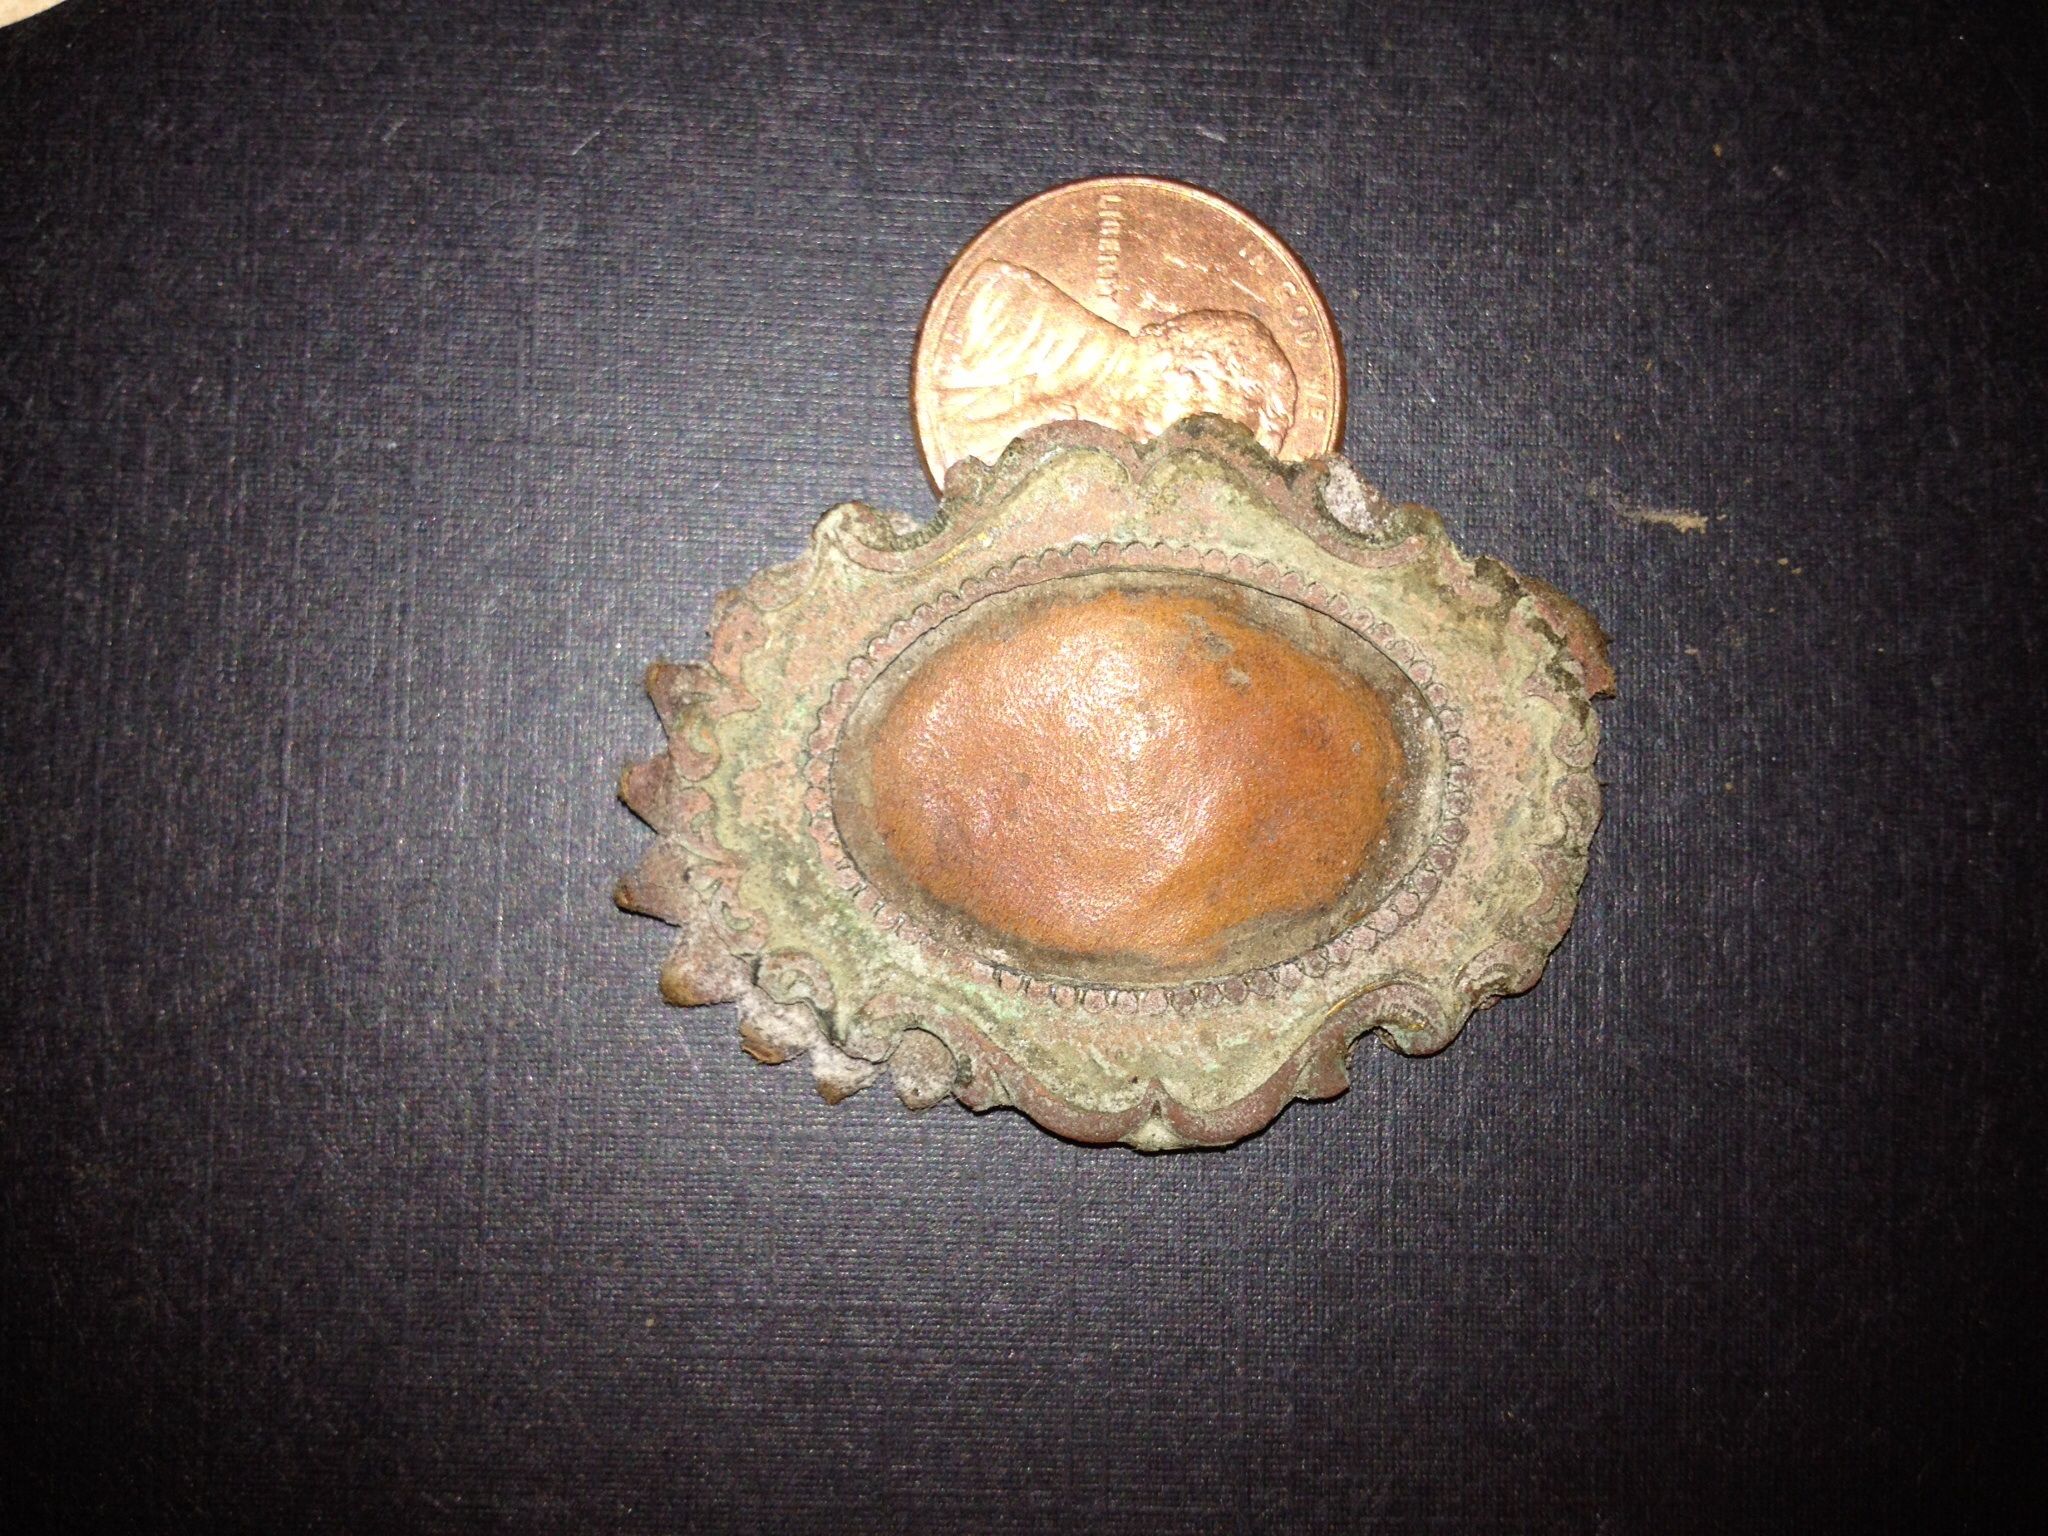 Leather broach or horse tack, a picture can be placed in it